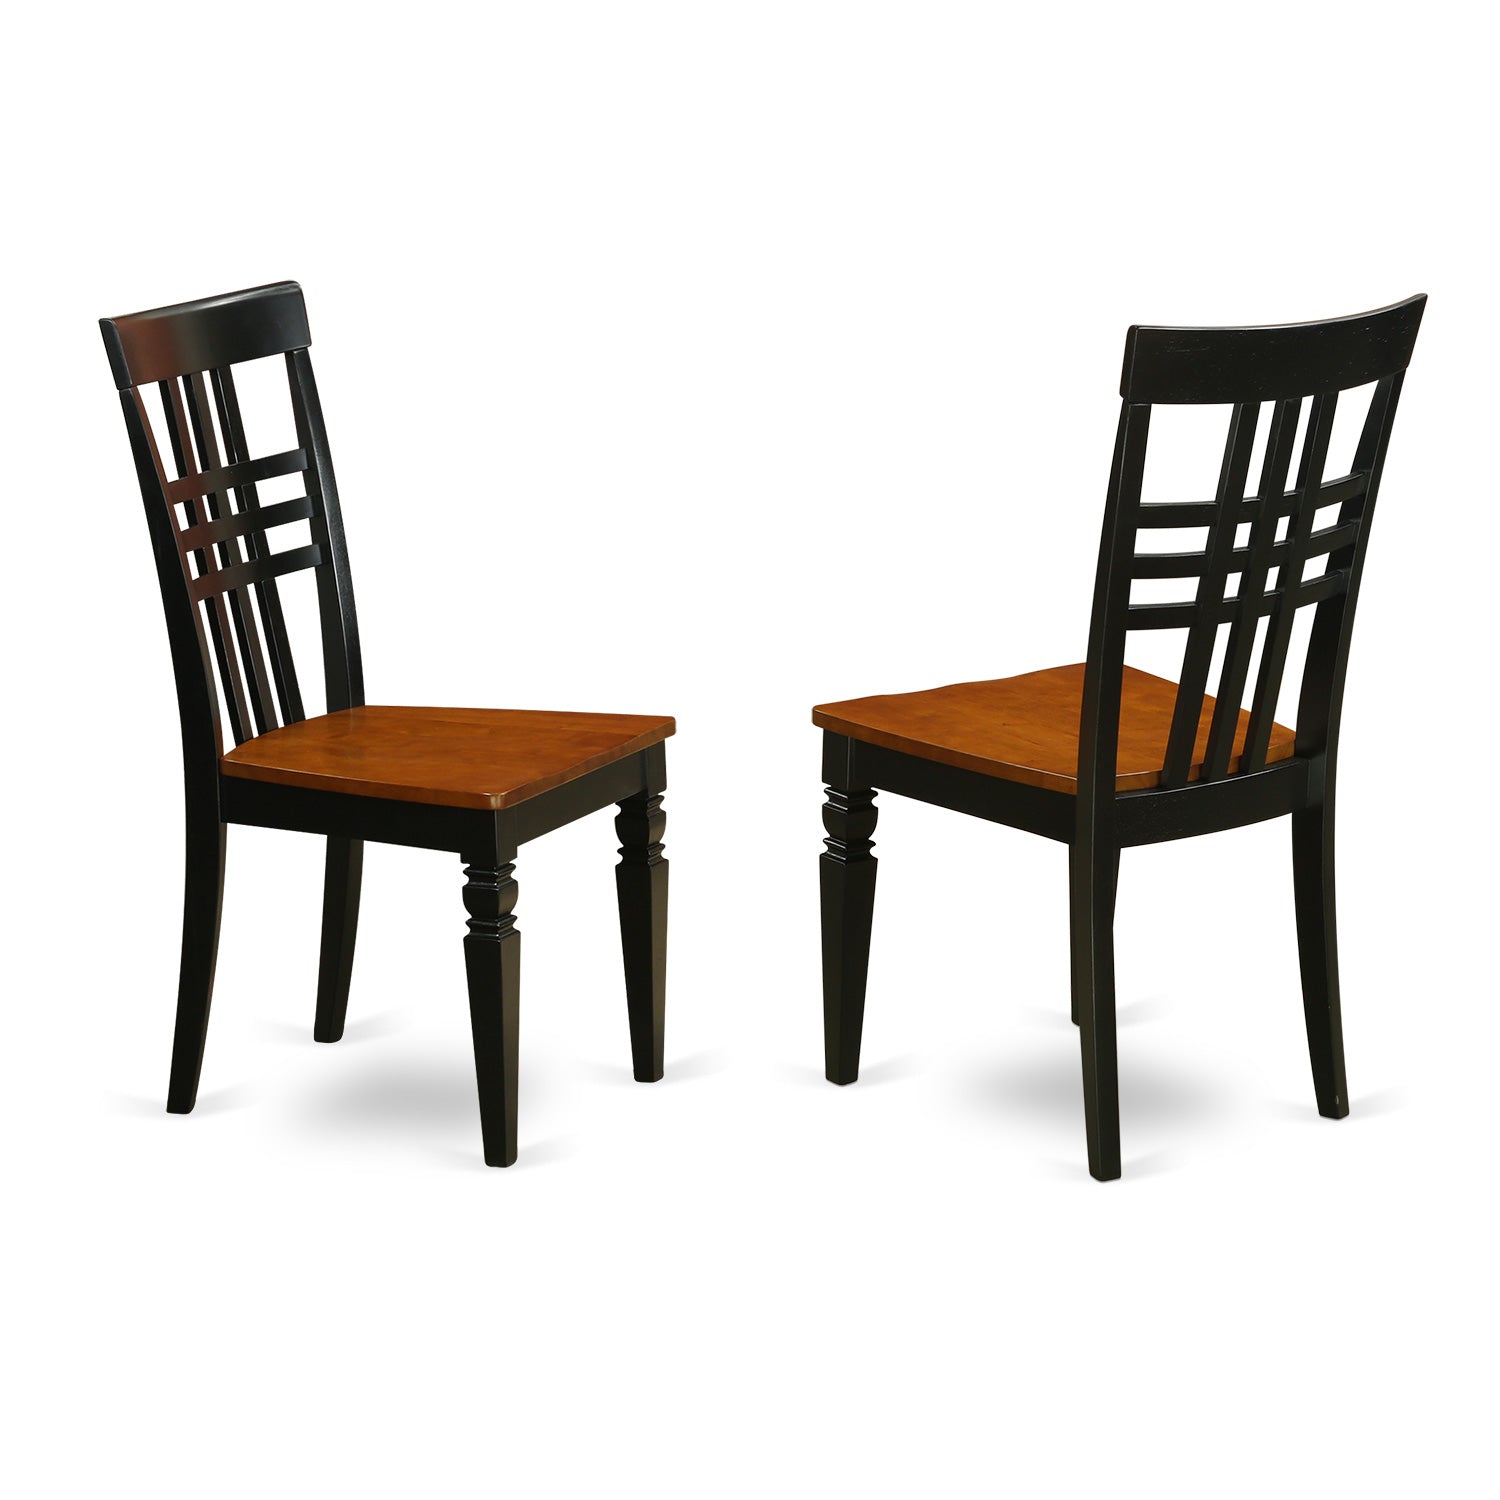 LGLG5-BCH-W 5 PC Table and chair set with a Table and 4 Dining Chairs in Black and Cherry